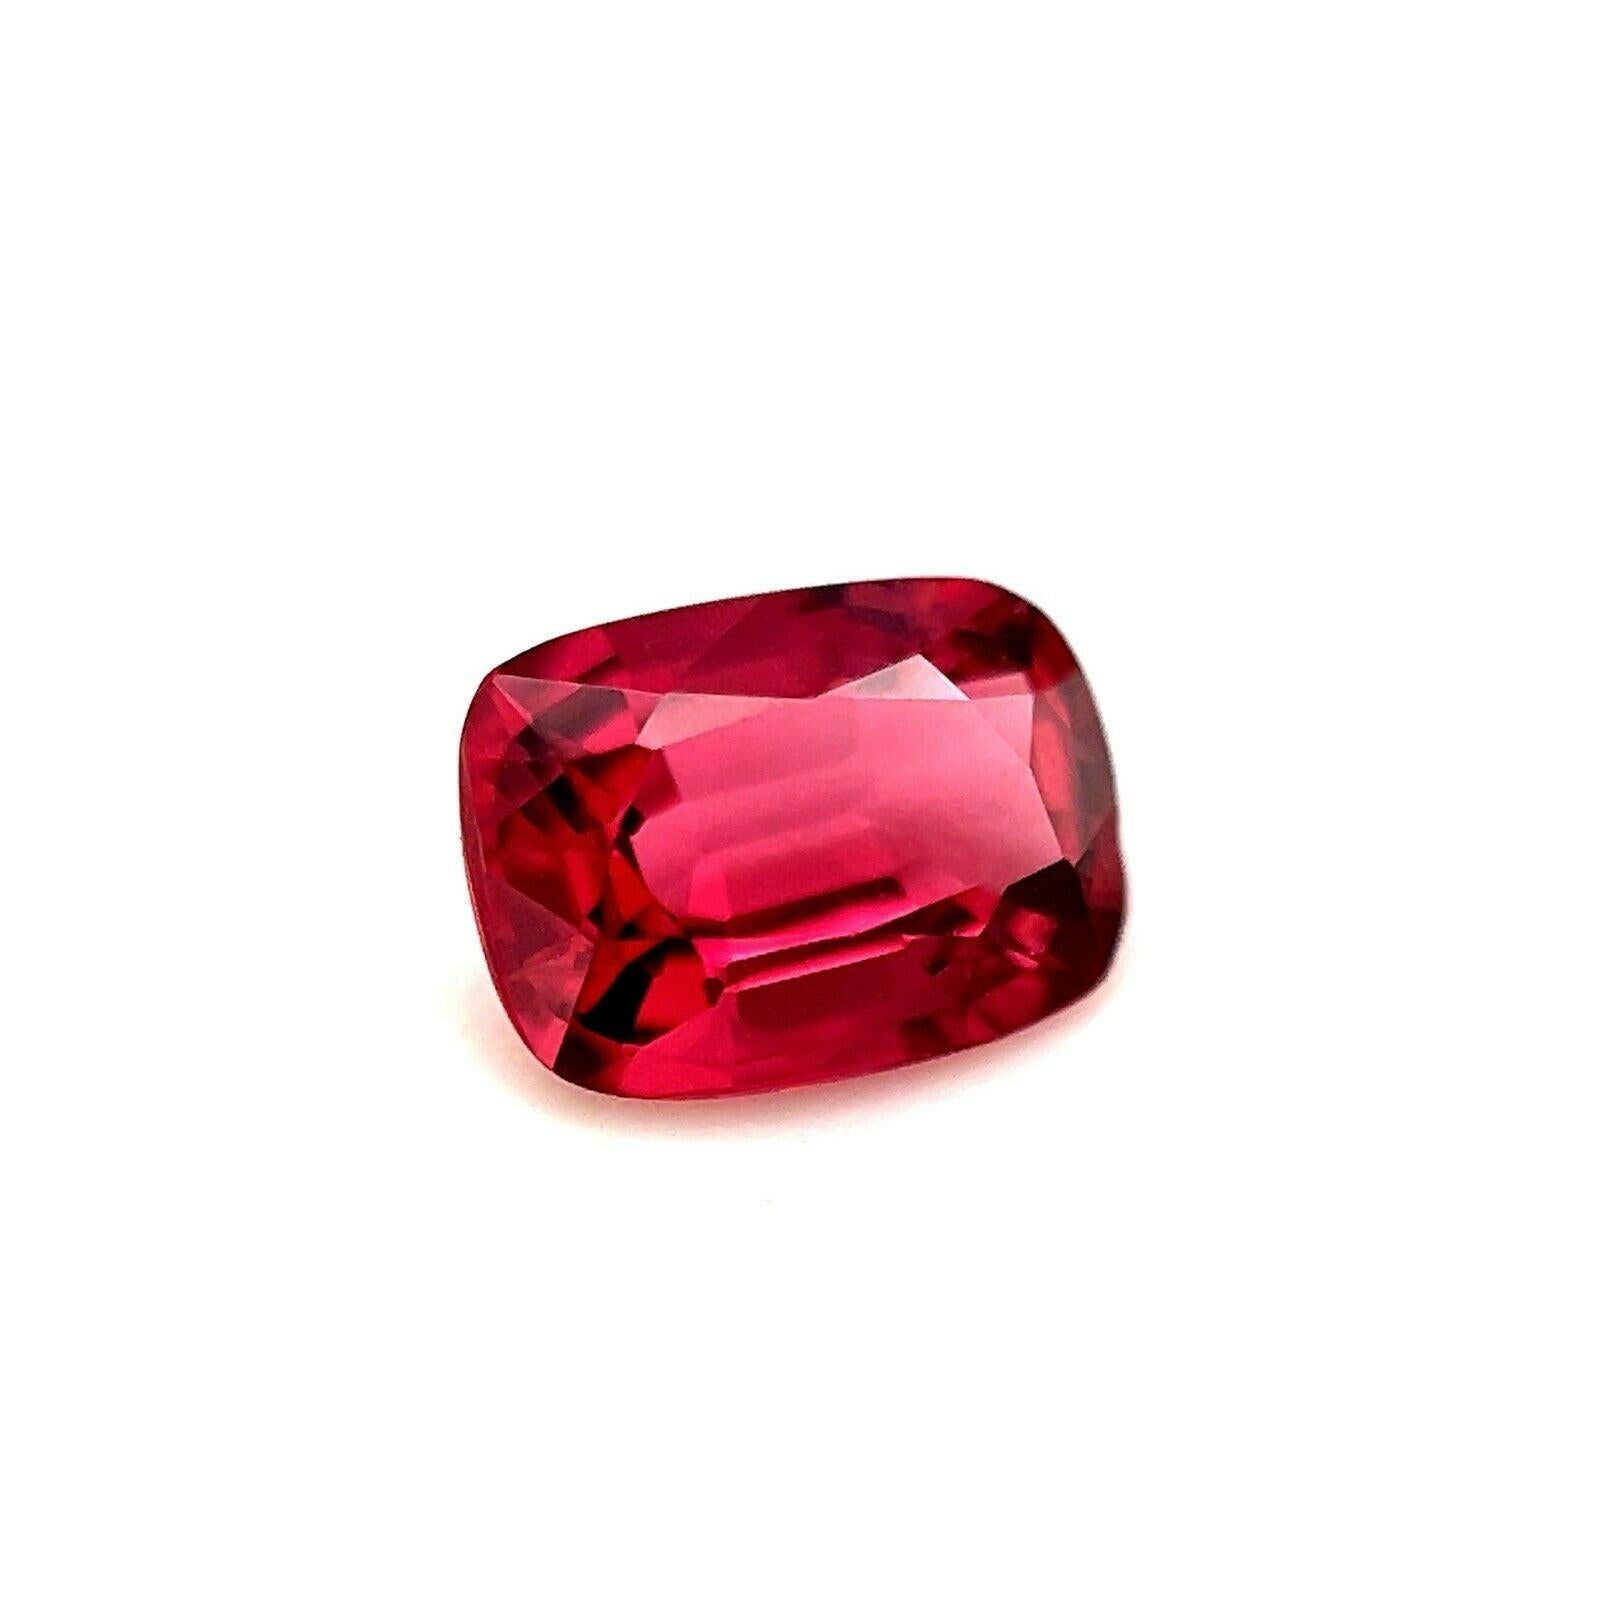 Fine Vivid Pink Red Natural Spinel 0.85ct Cushion Cut 6.5x4.8mm Loose Rare Gem

Natural Pink Red Spinel Gemstone.
Beautiful natural 0.85 Carat spinel with a vivid pink red colour and excellent clarity. Very clean stone, also has an excellent cushion